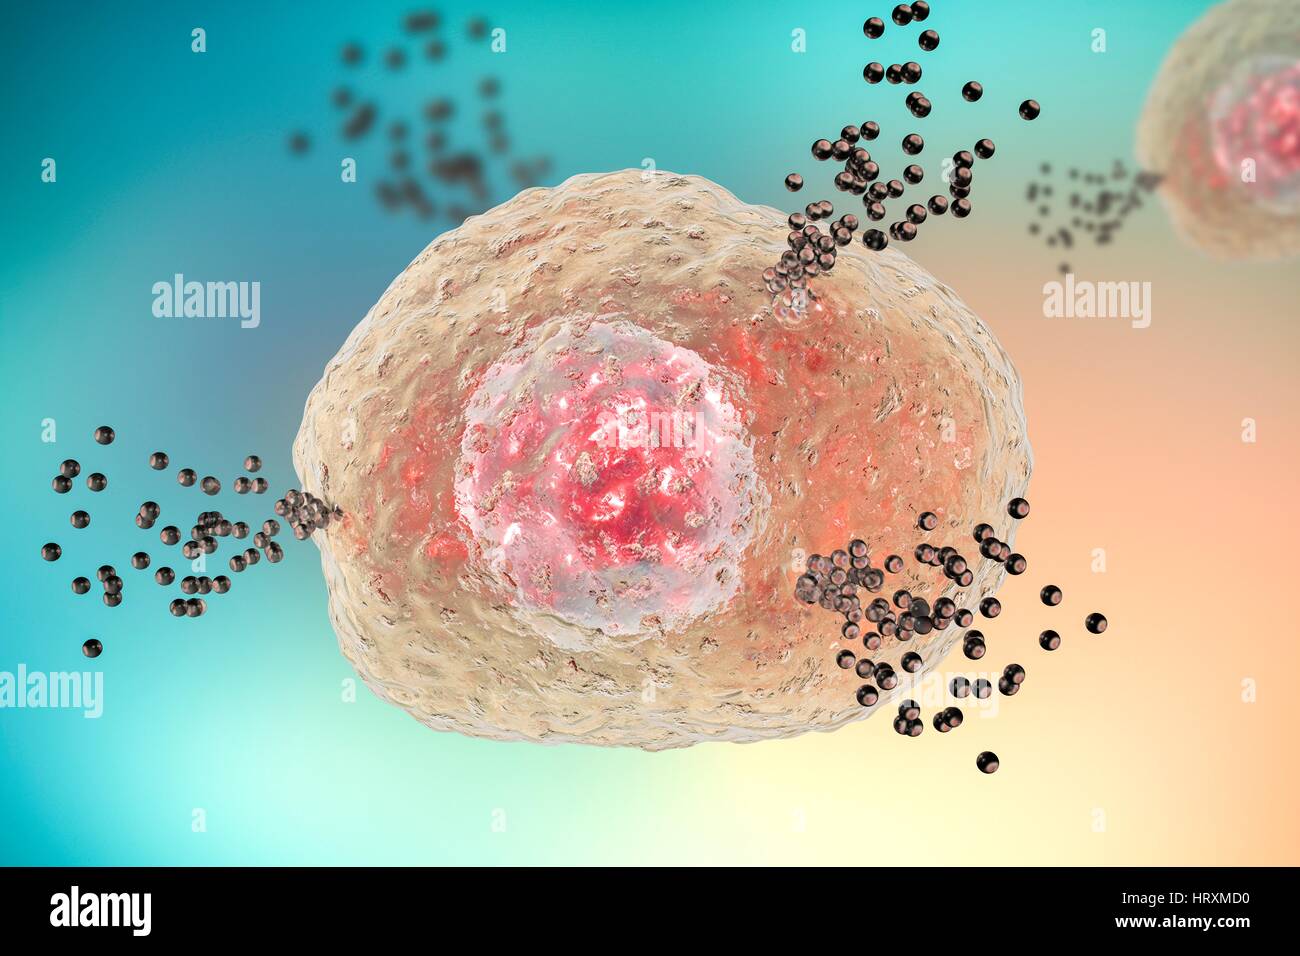 Mast cell releasing histamine during allergic response,computer illustration.Mast cells are type of leucocyte (white blood cell).They contain chemical mediators histamine,serotonin heparin.Histamine is released from mast cells in response to allergen,causing localized inflammatory immune Stock Photo